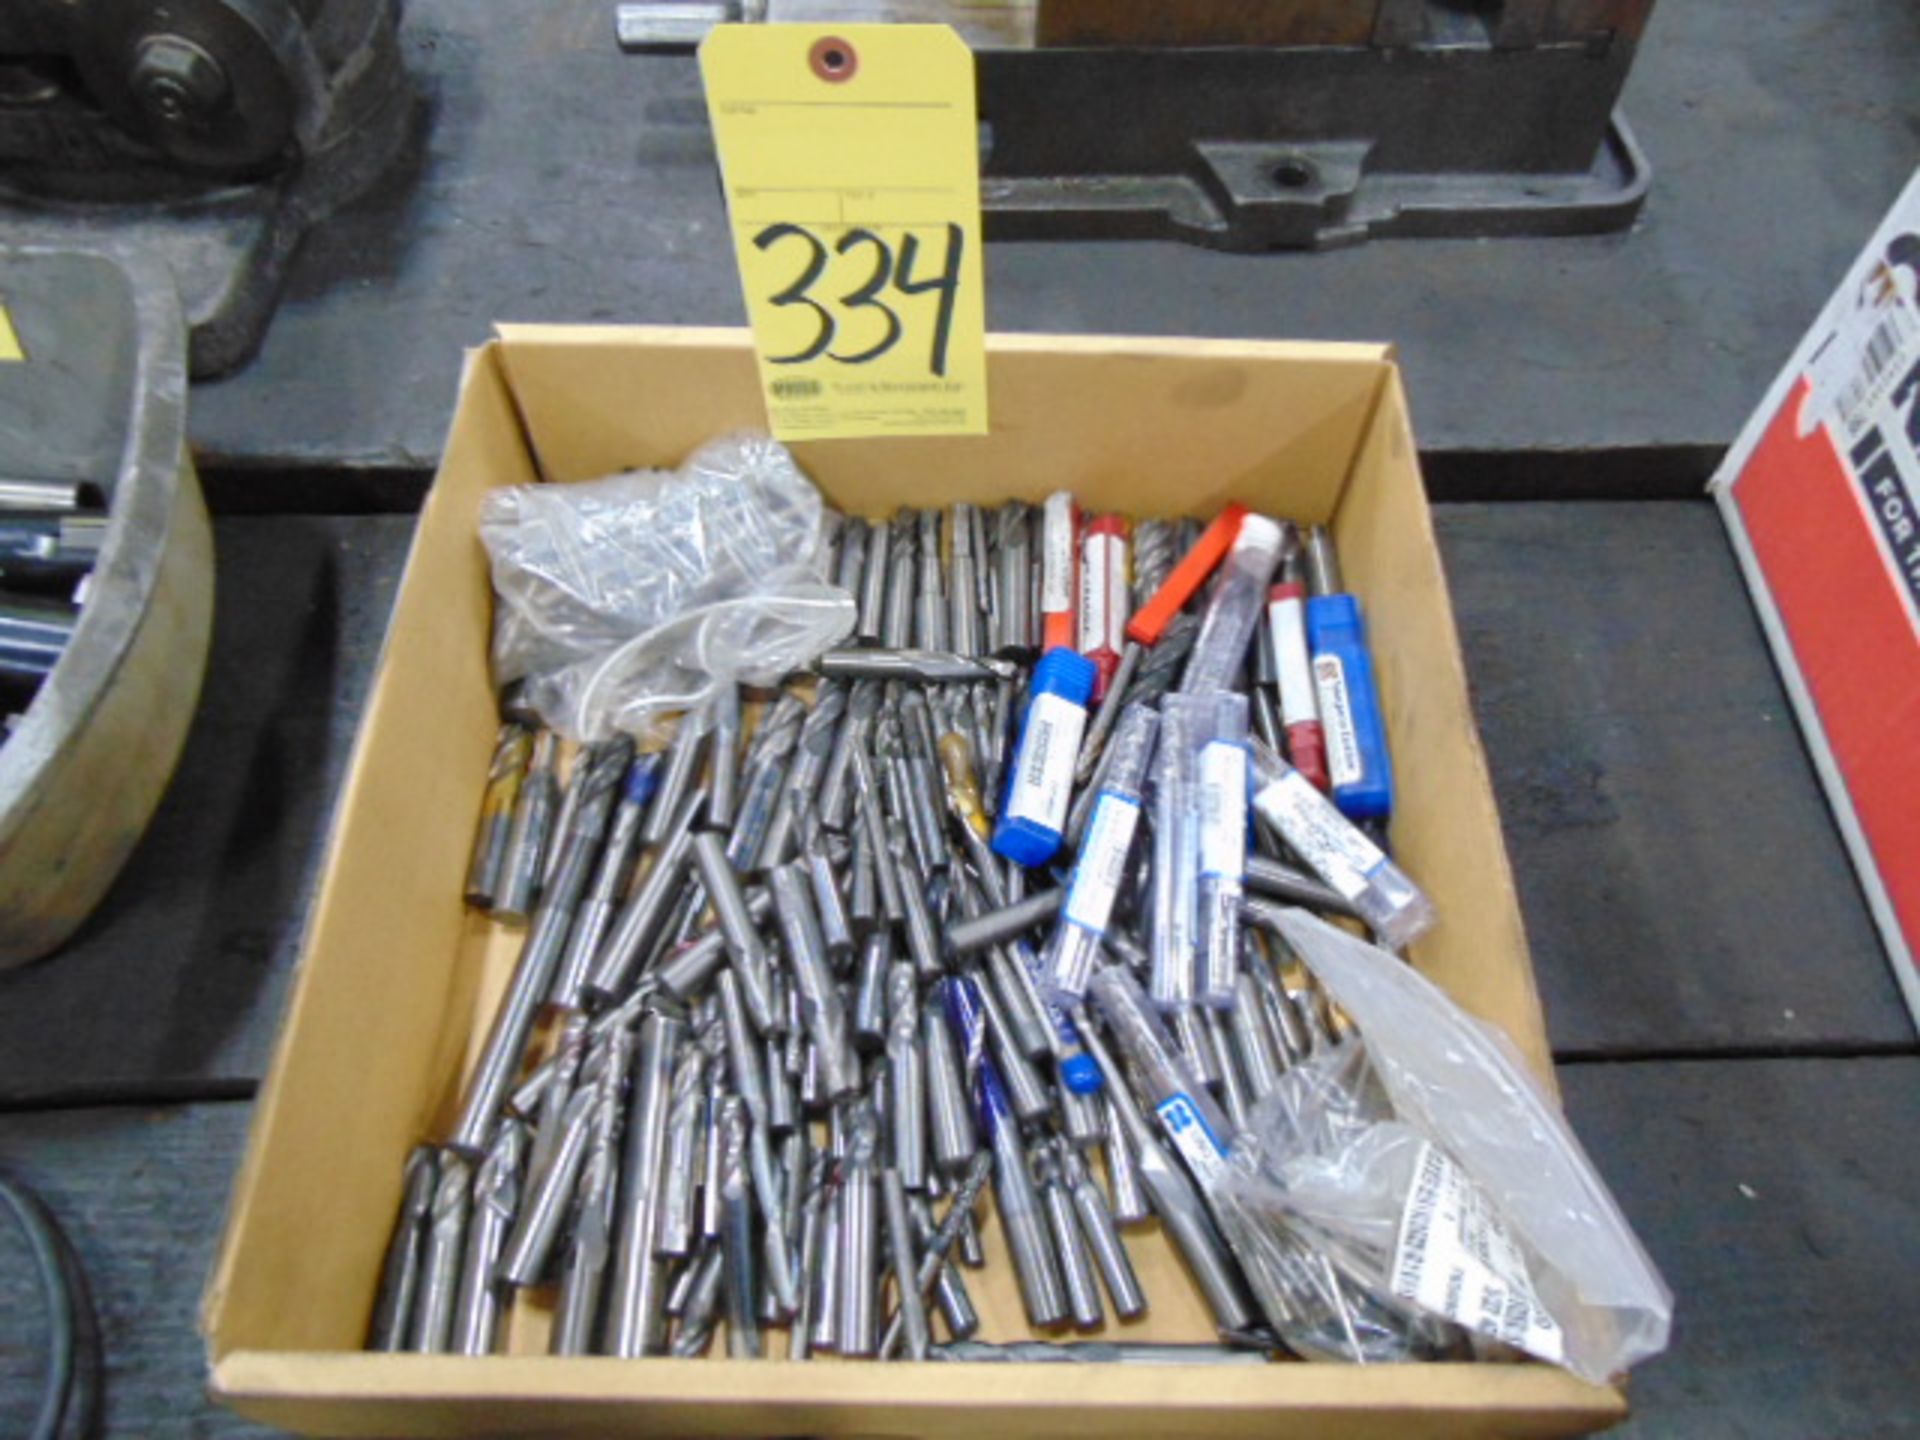 LOT OF SOLID CARBIDE ENDMILLS, assorted (in one box)